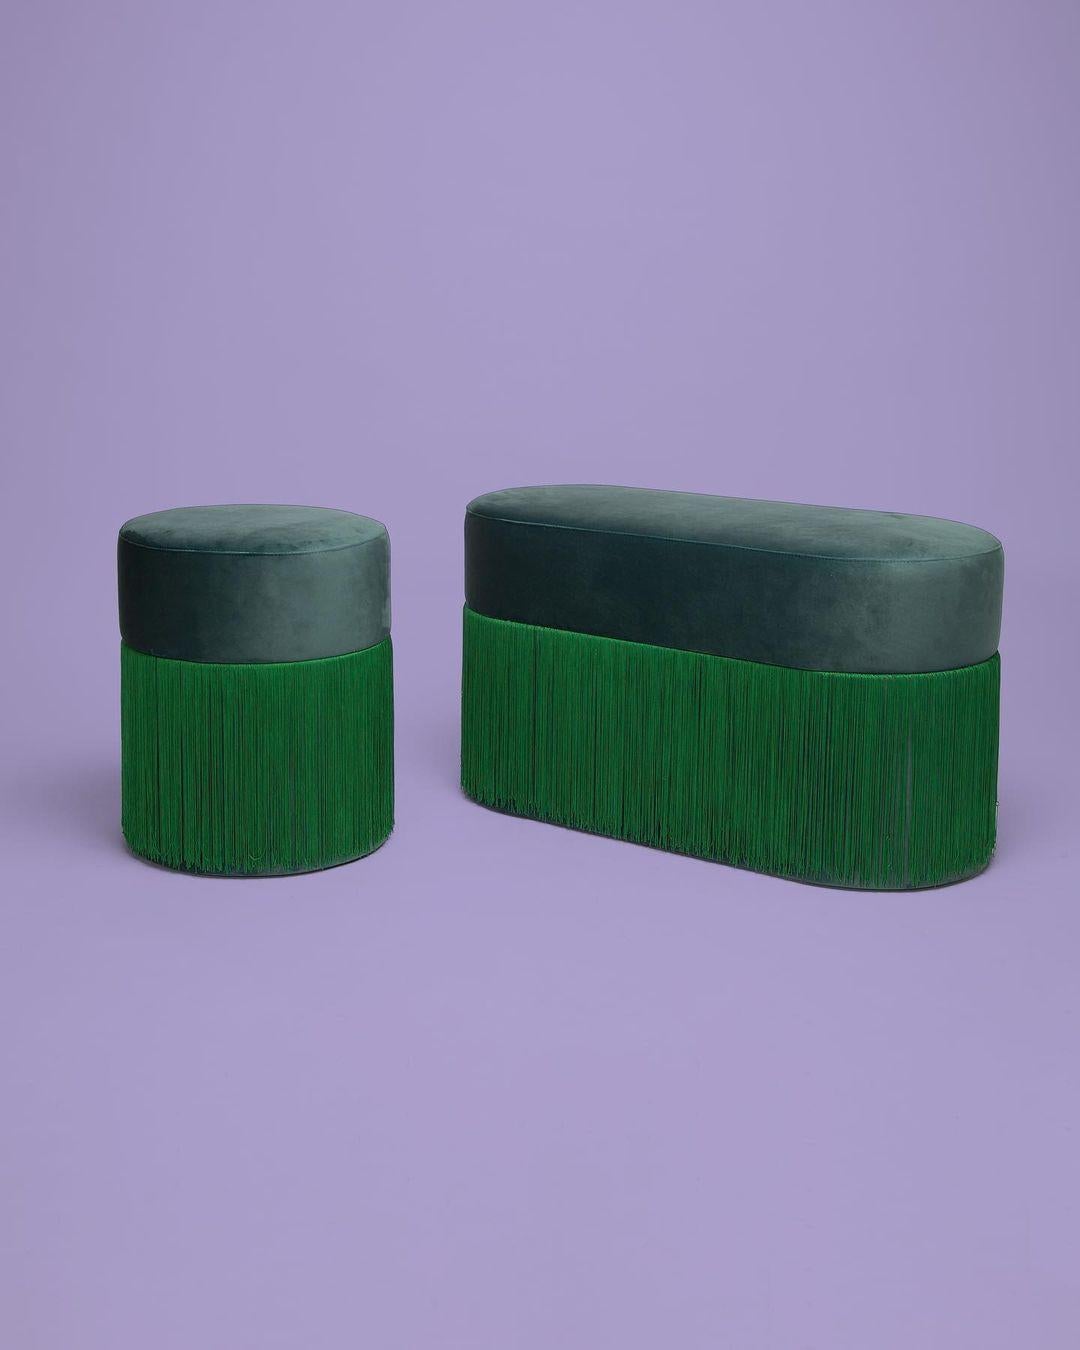 Set of 2 Poufs pill L and S by Houtique
Dimensions: H 45 x 80 x 35 cm
H 45 x 35 x 35 cm
Materials: Velvet upholstery and 30cm fringes


Art-Deco style pouf with wood structure and velvet fabric.
2 fiber-board discs of 16mm, joined by wooden